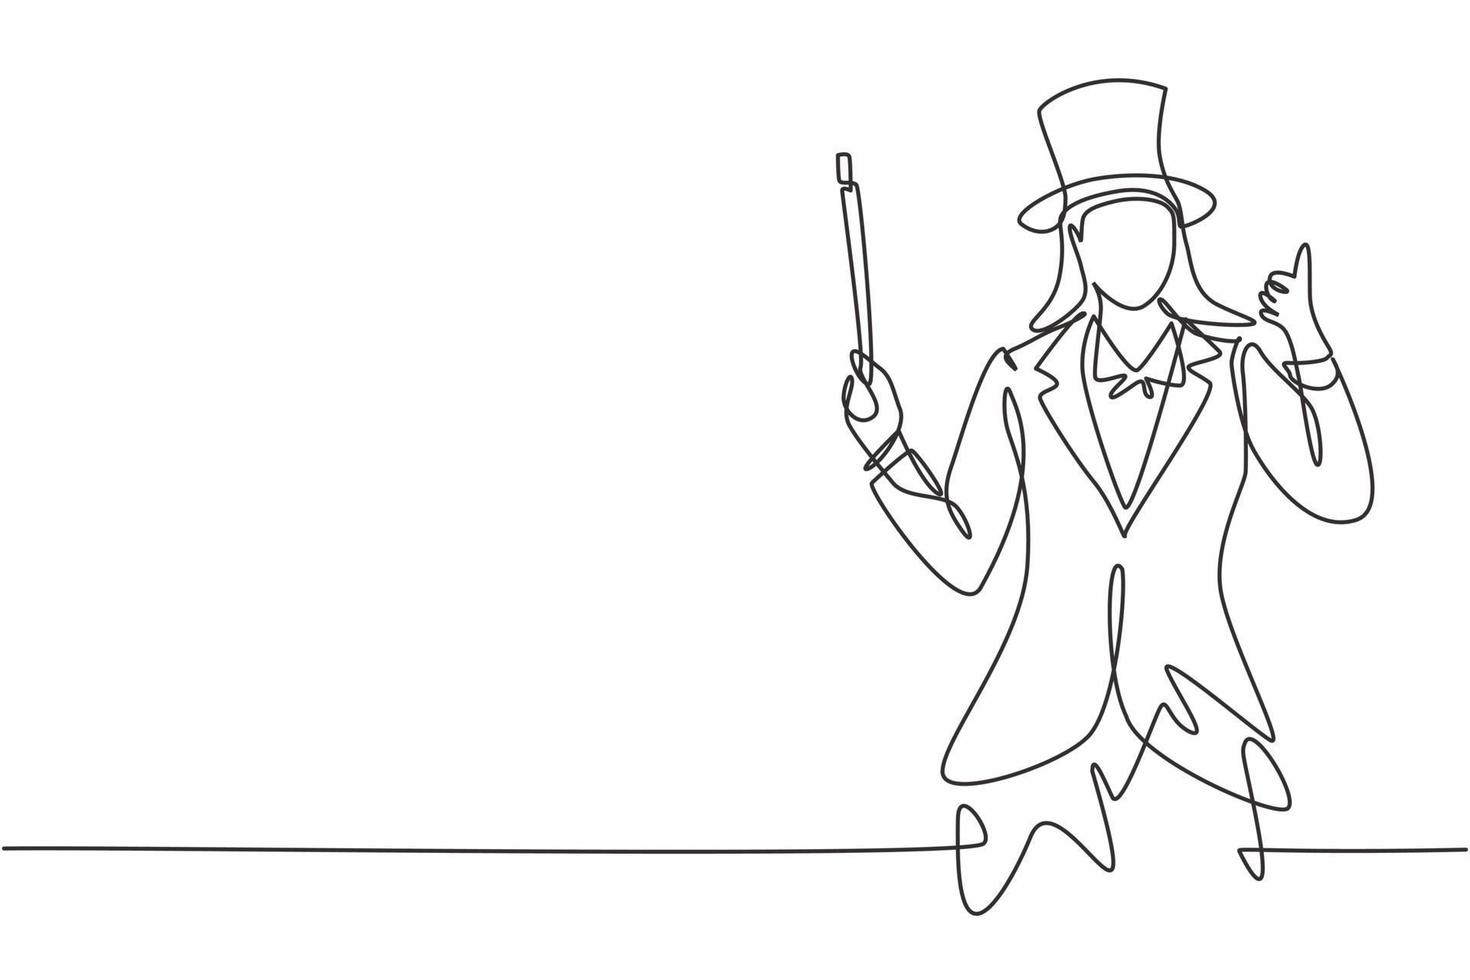 Single one line drawing of female magician with a gesture thumbs up wearing a hat and holding a magic stick ready to entertain the audience. Continuous line draw design graphic vector illustration